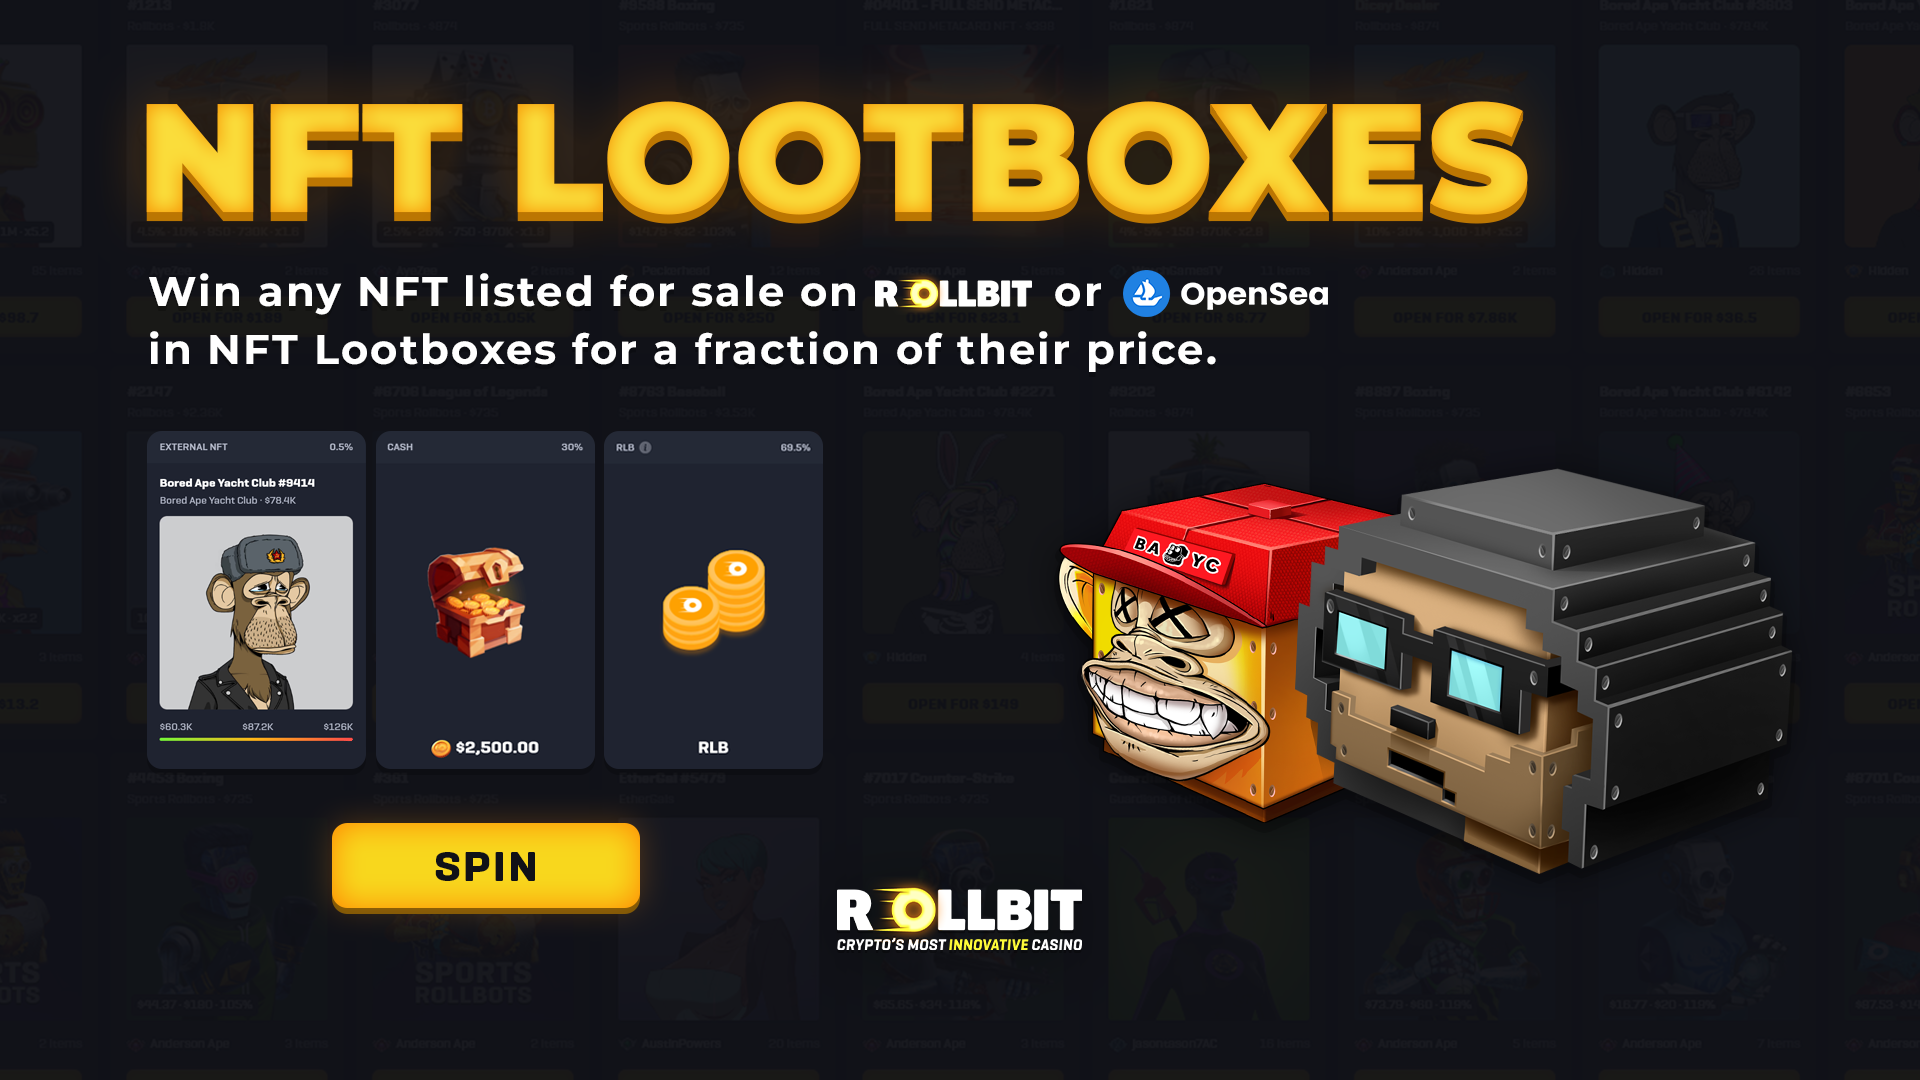 NFT Lootboxes: Win ANY NFT listed for sale on OpenSea